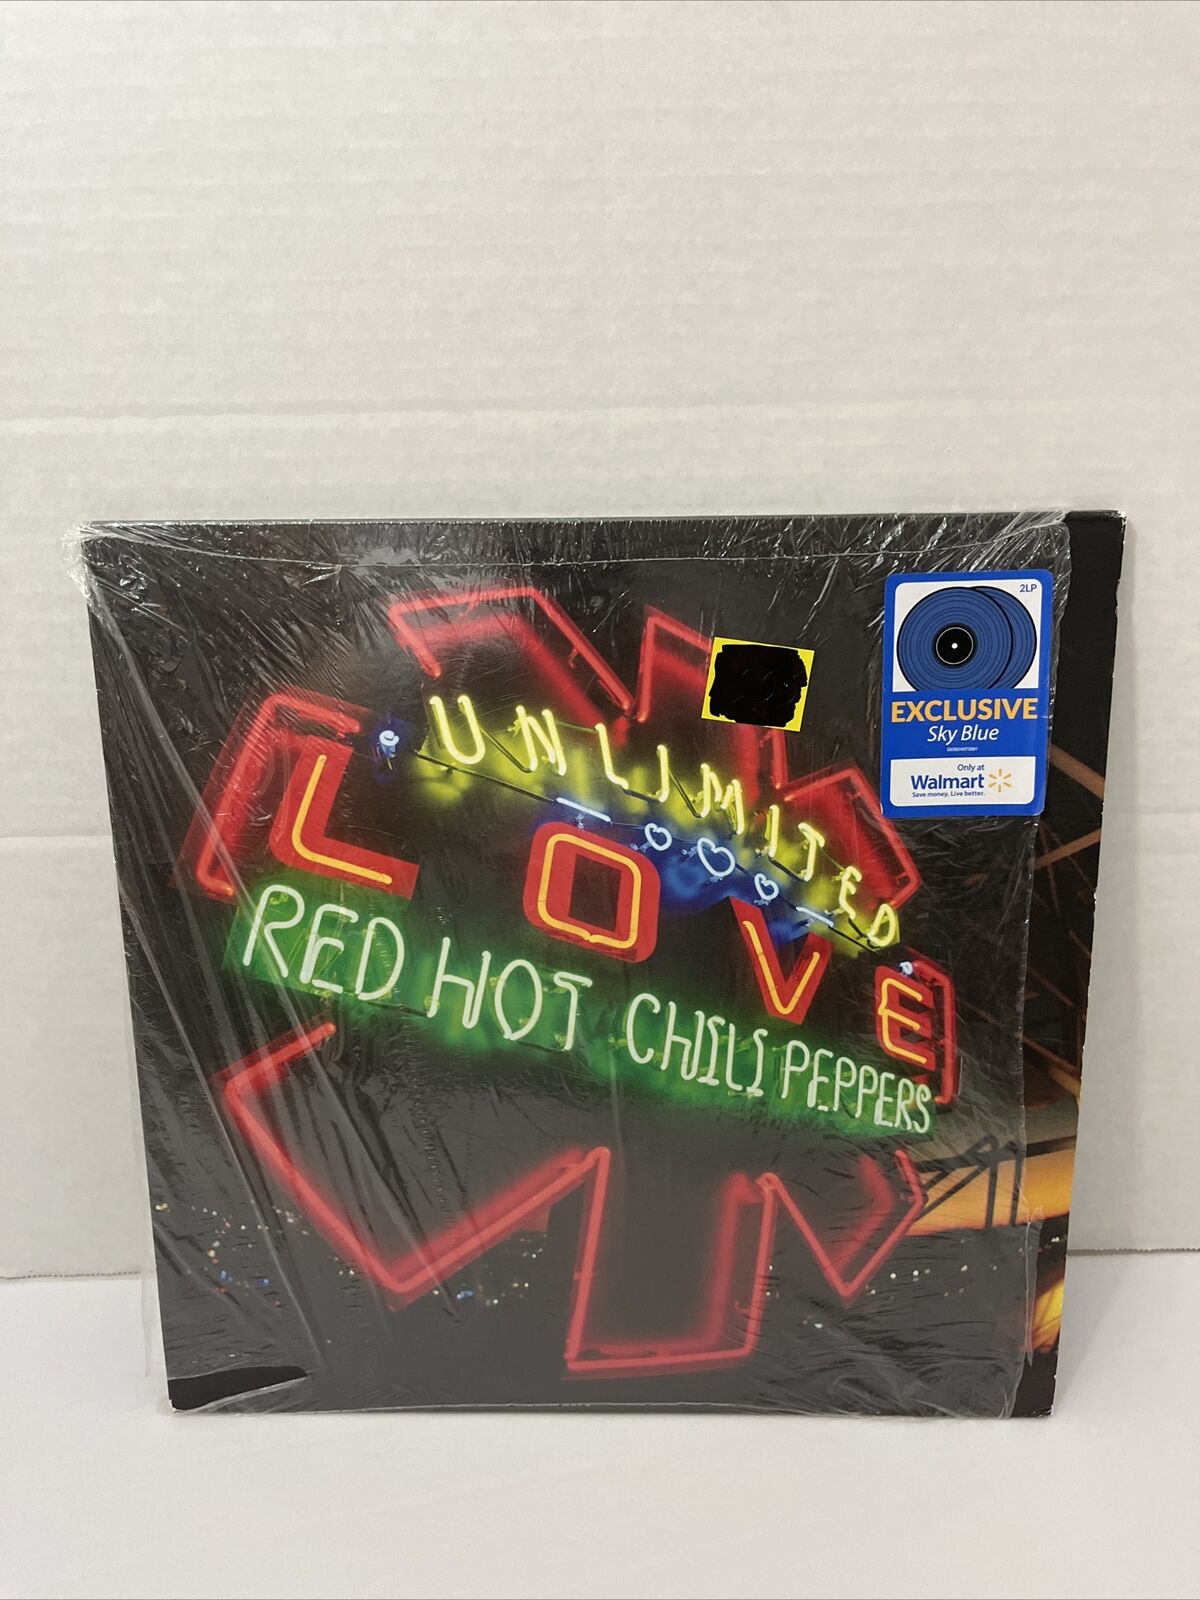 Red Hot Chili Peppers Unlimited Love - 2 LP Walmart Exclusive Sky Blue Vinyl 